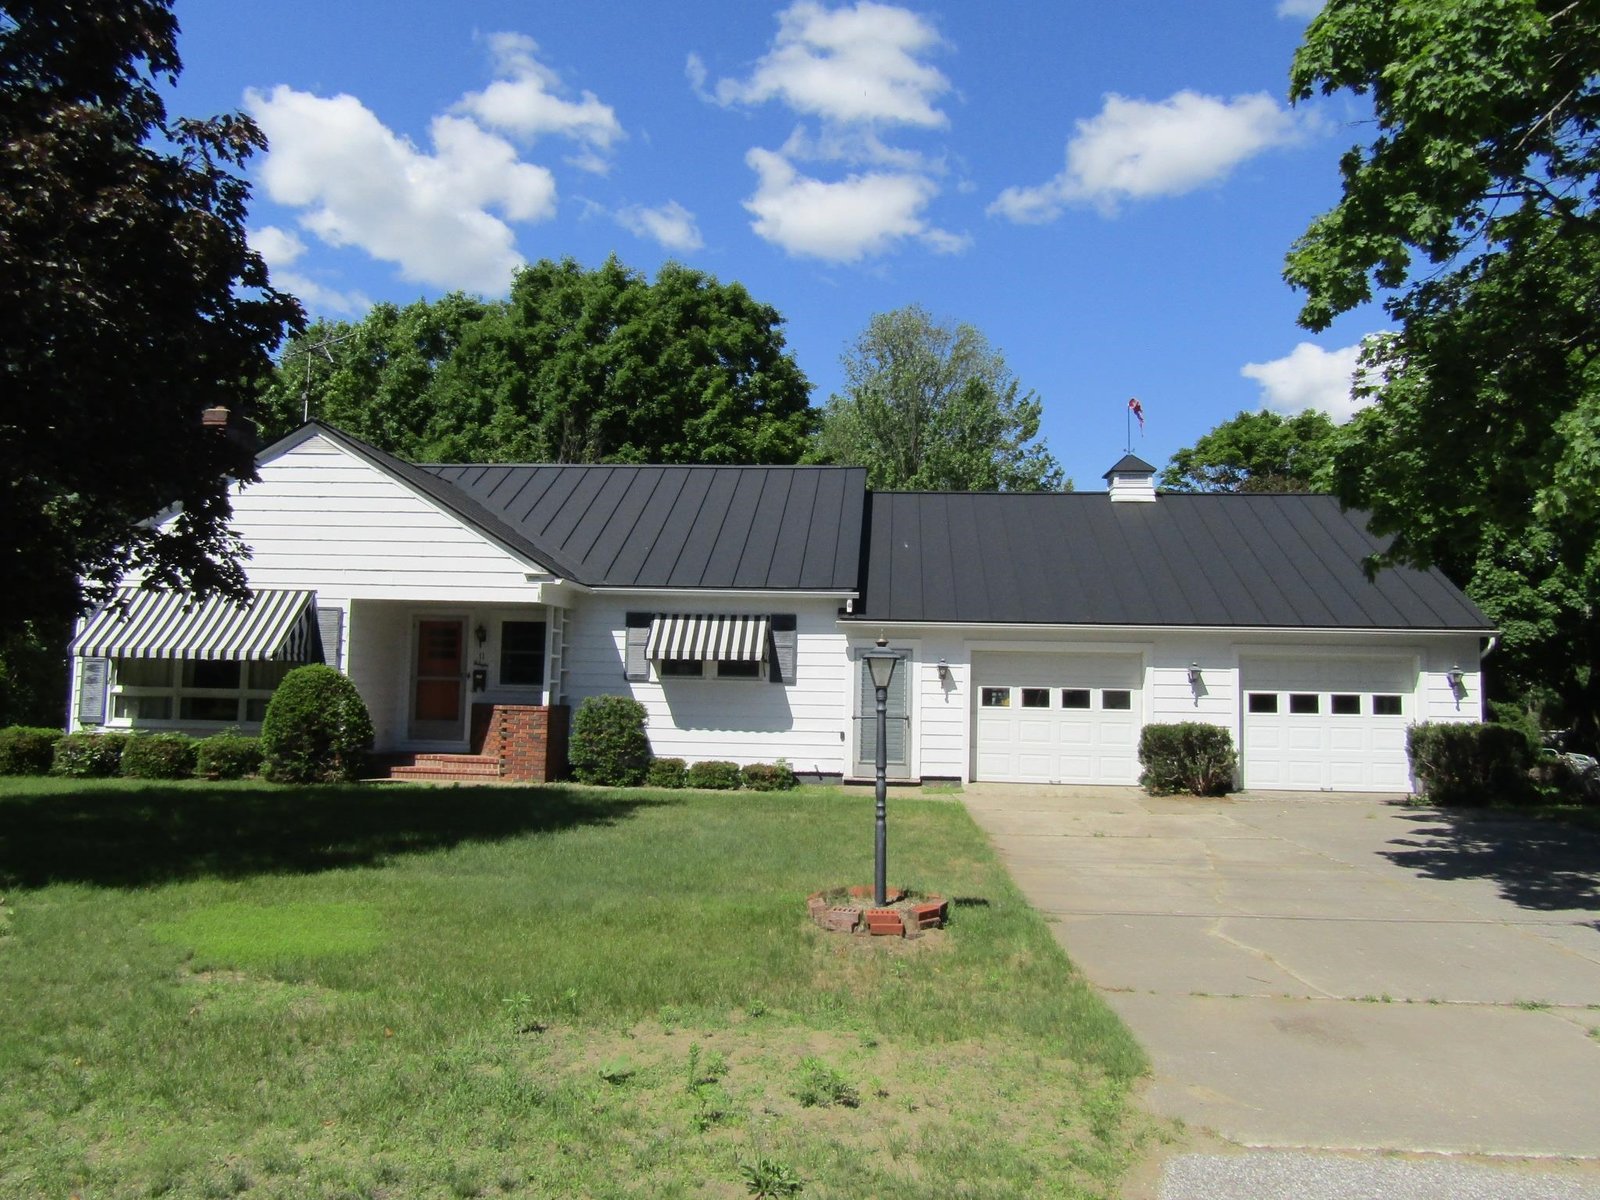 Sold property in Swanton